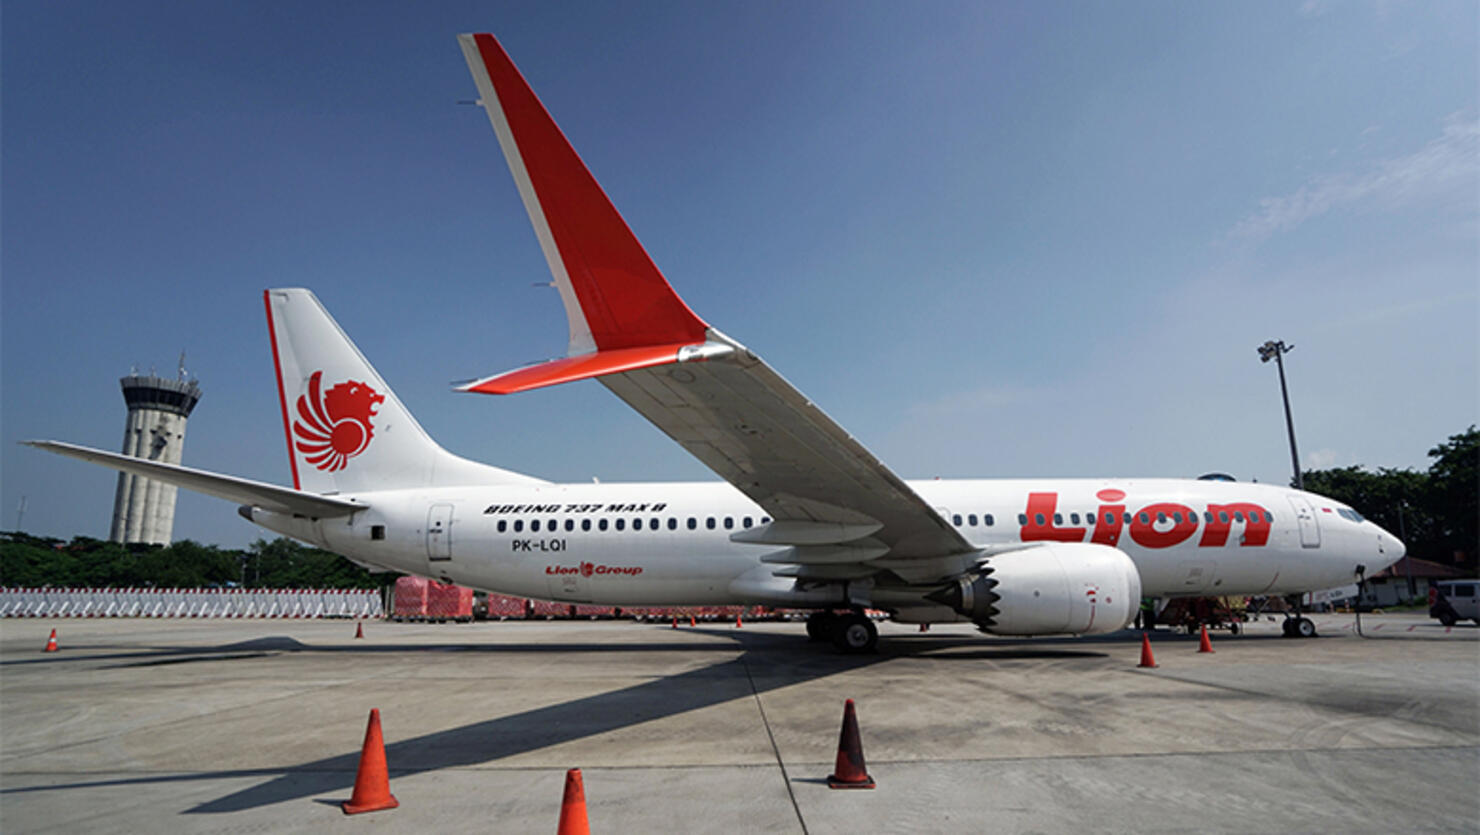 Lion Air Boeing Max 8 Aircraft Grounded At Jakarta International Airport